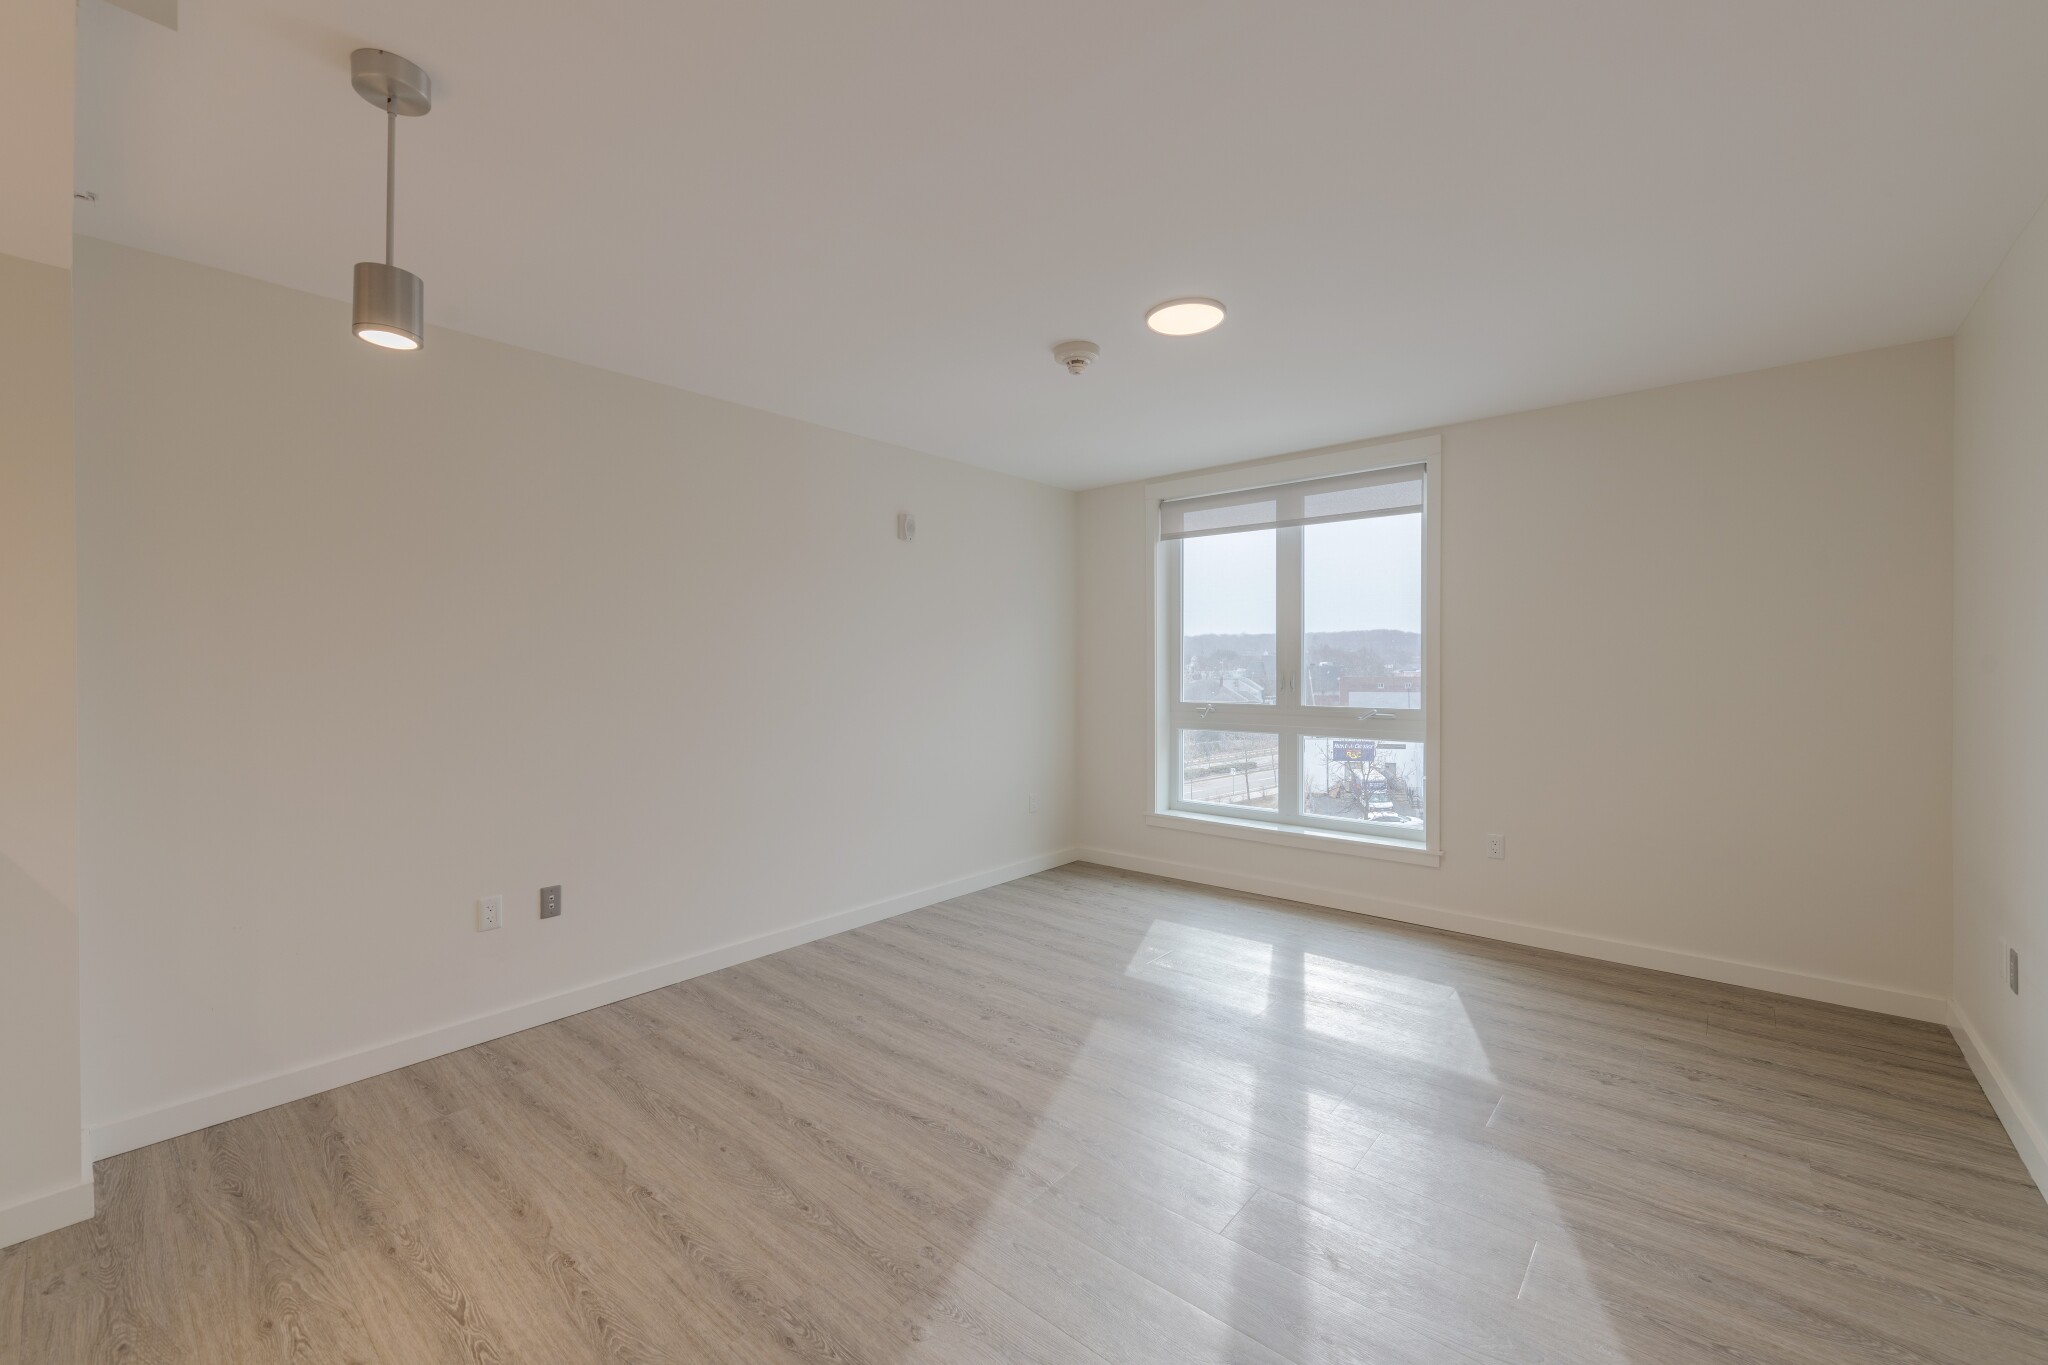 Photos of apartment on Southern Artery,Quincy MA 02169